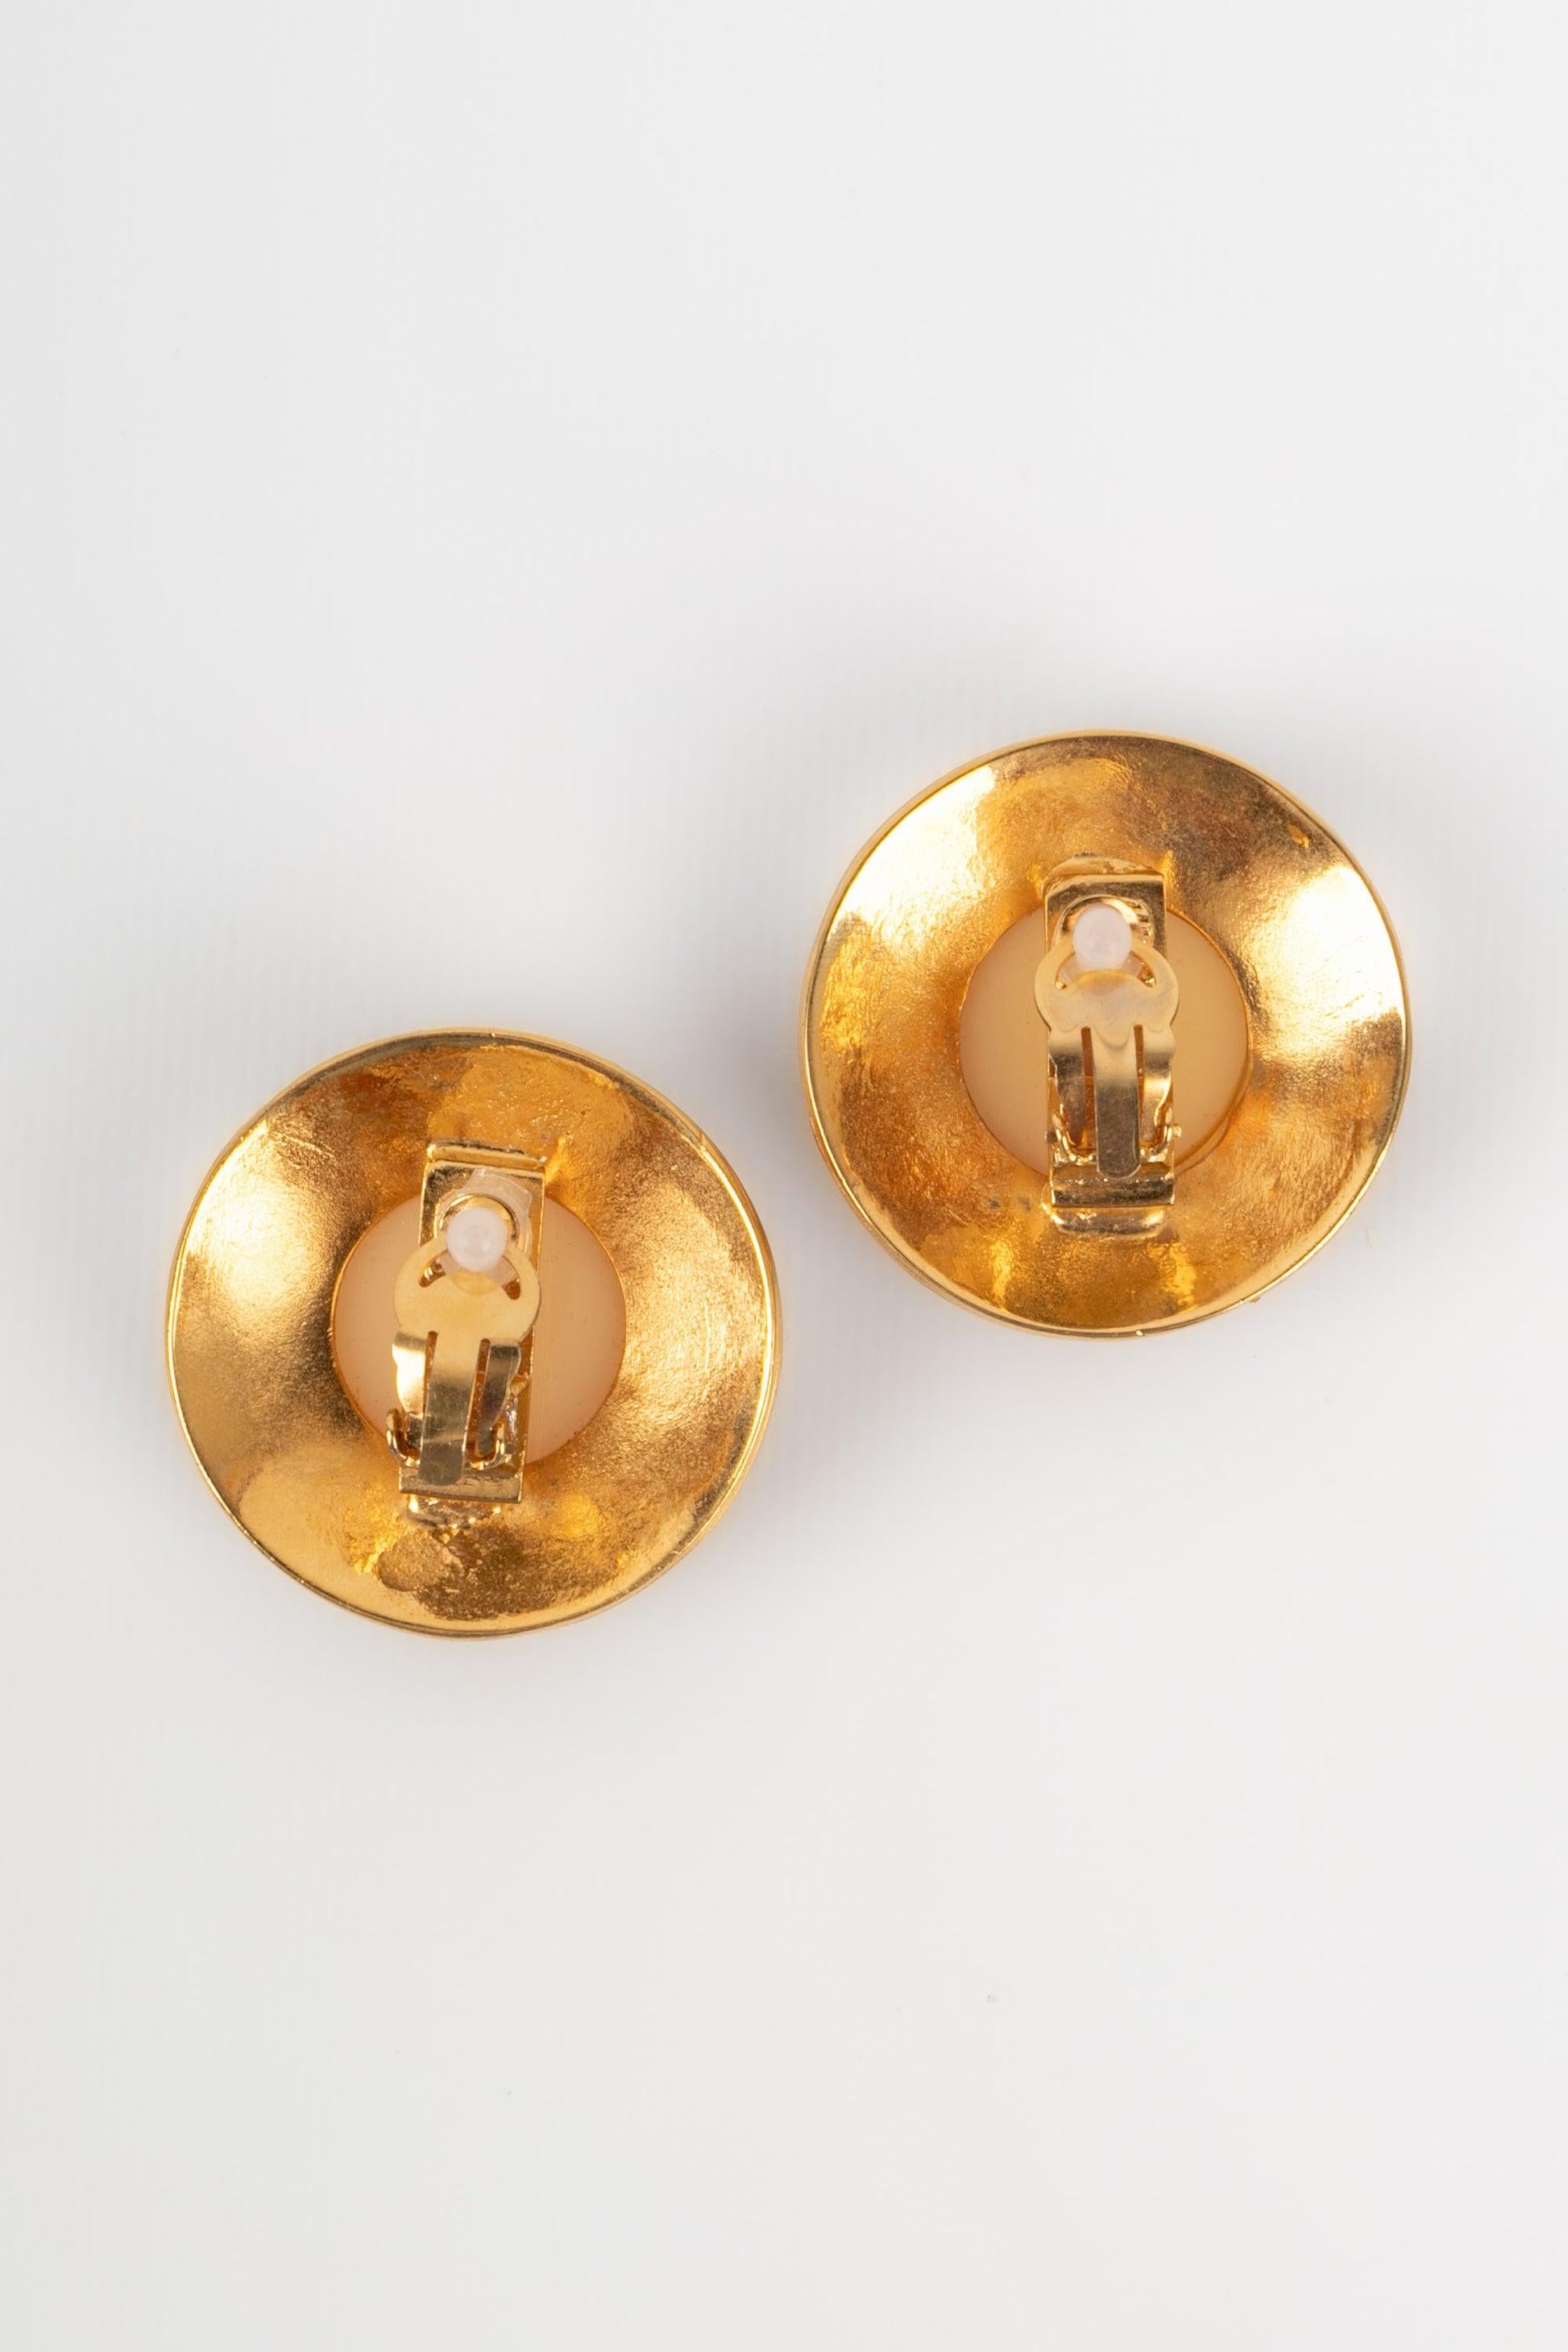 Chanel Round Clip-on Earrings in Golden Metal and Rhinestones In Excellent Condition For Sale In SAINT-OUEN-SUR-SEINE, FR